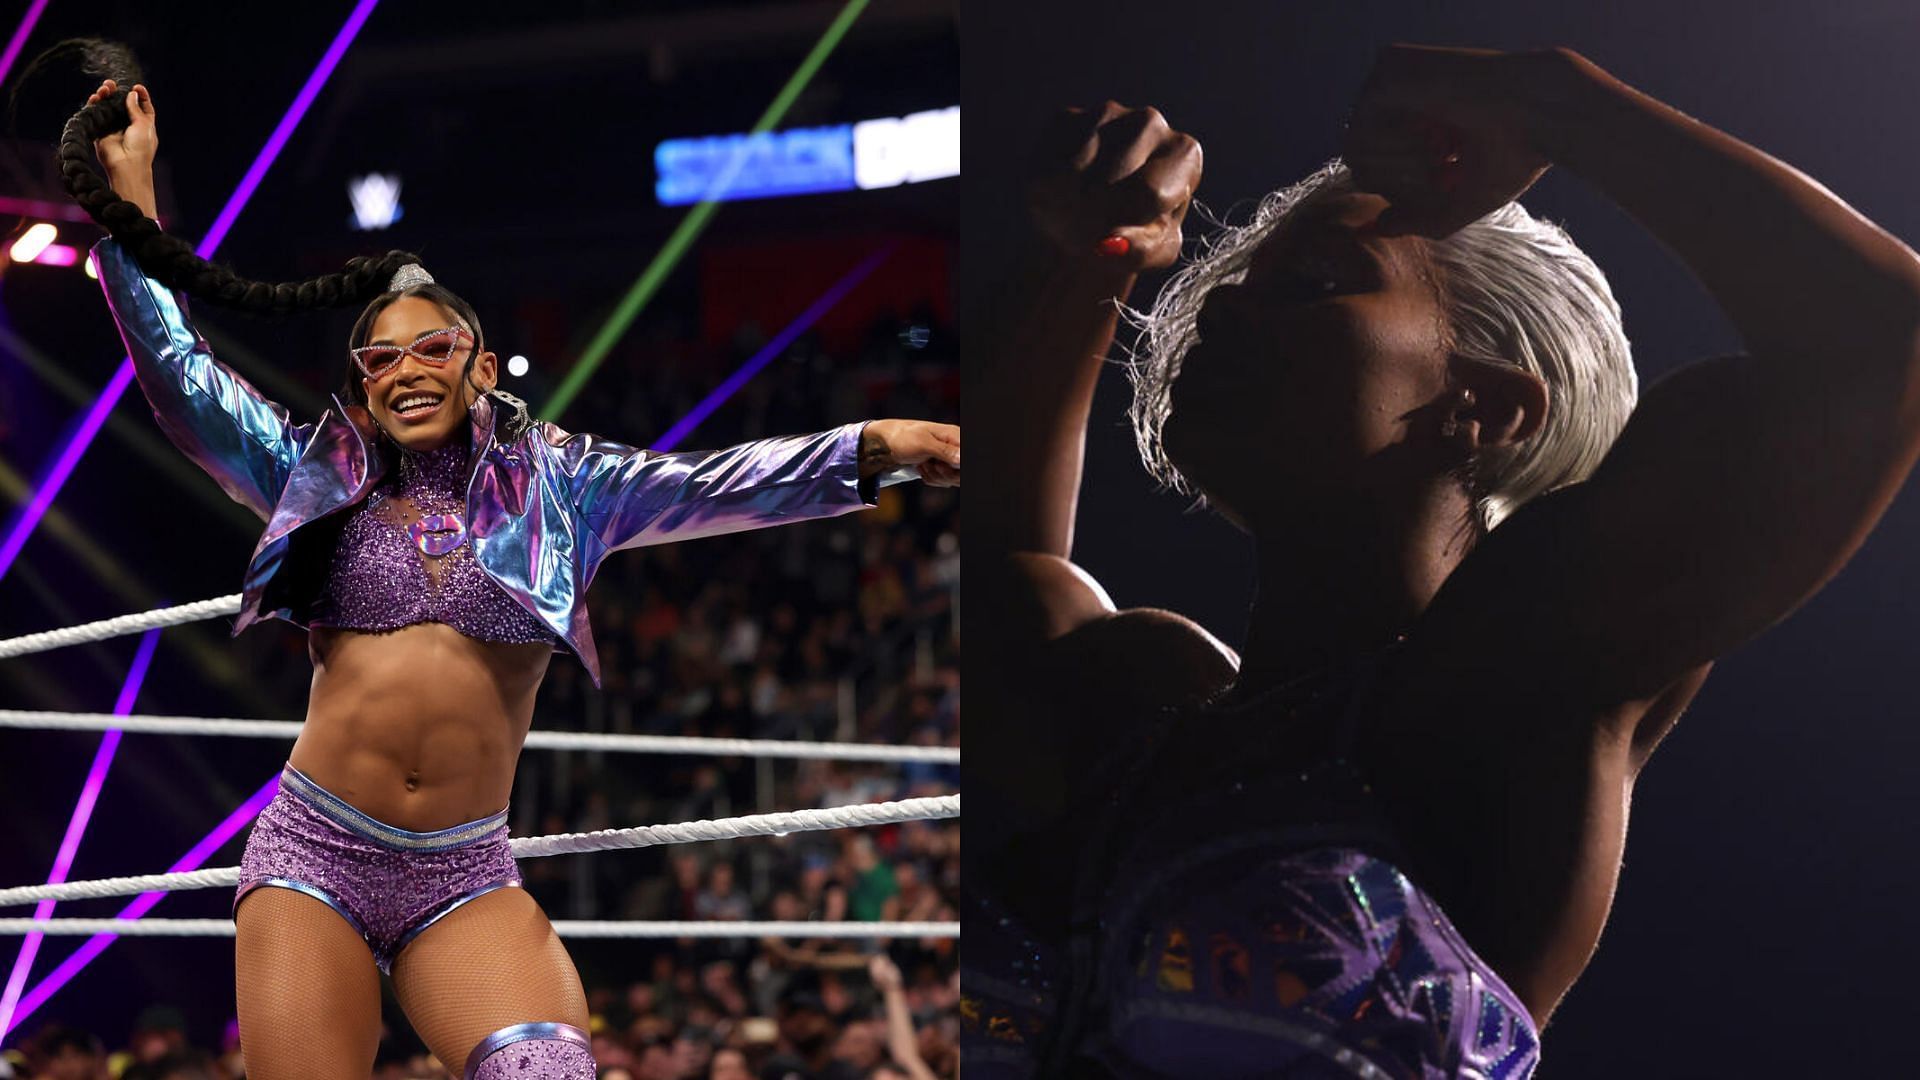 Bianca Belair and Jade Cargill teamed up on the SmackDown after WrestleMania XL